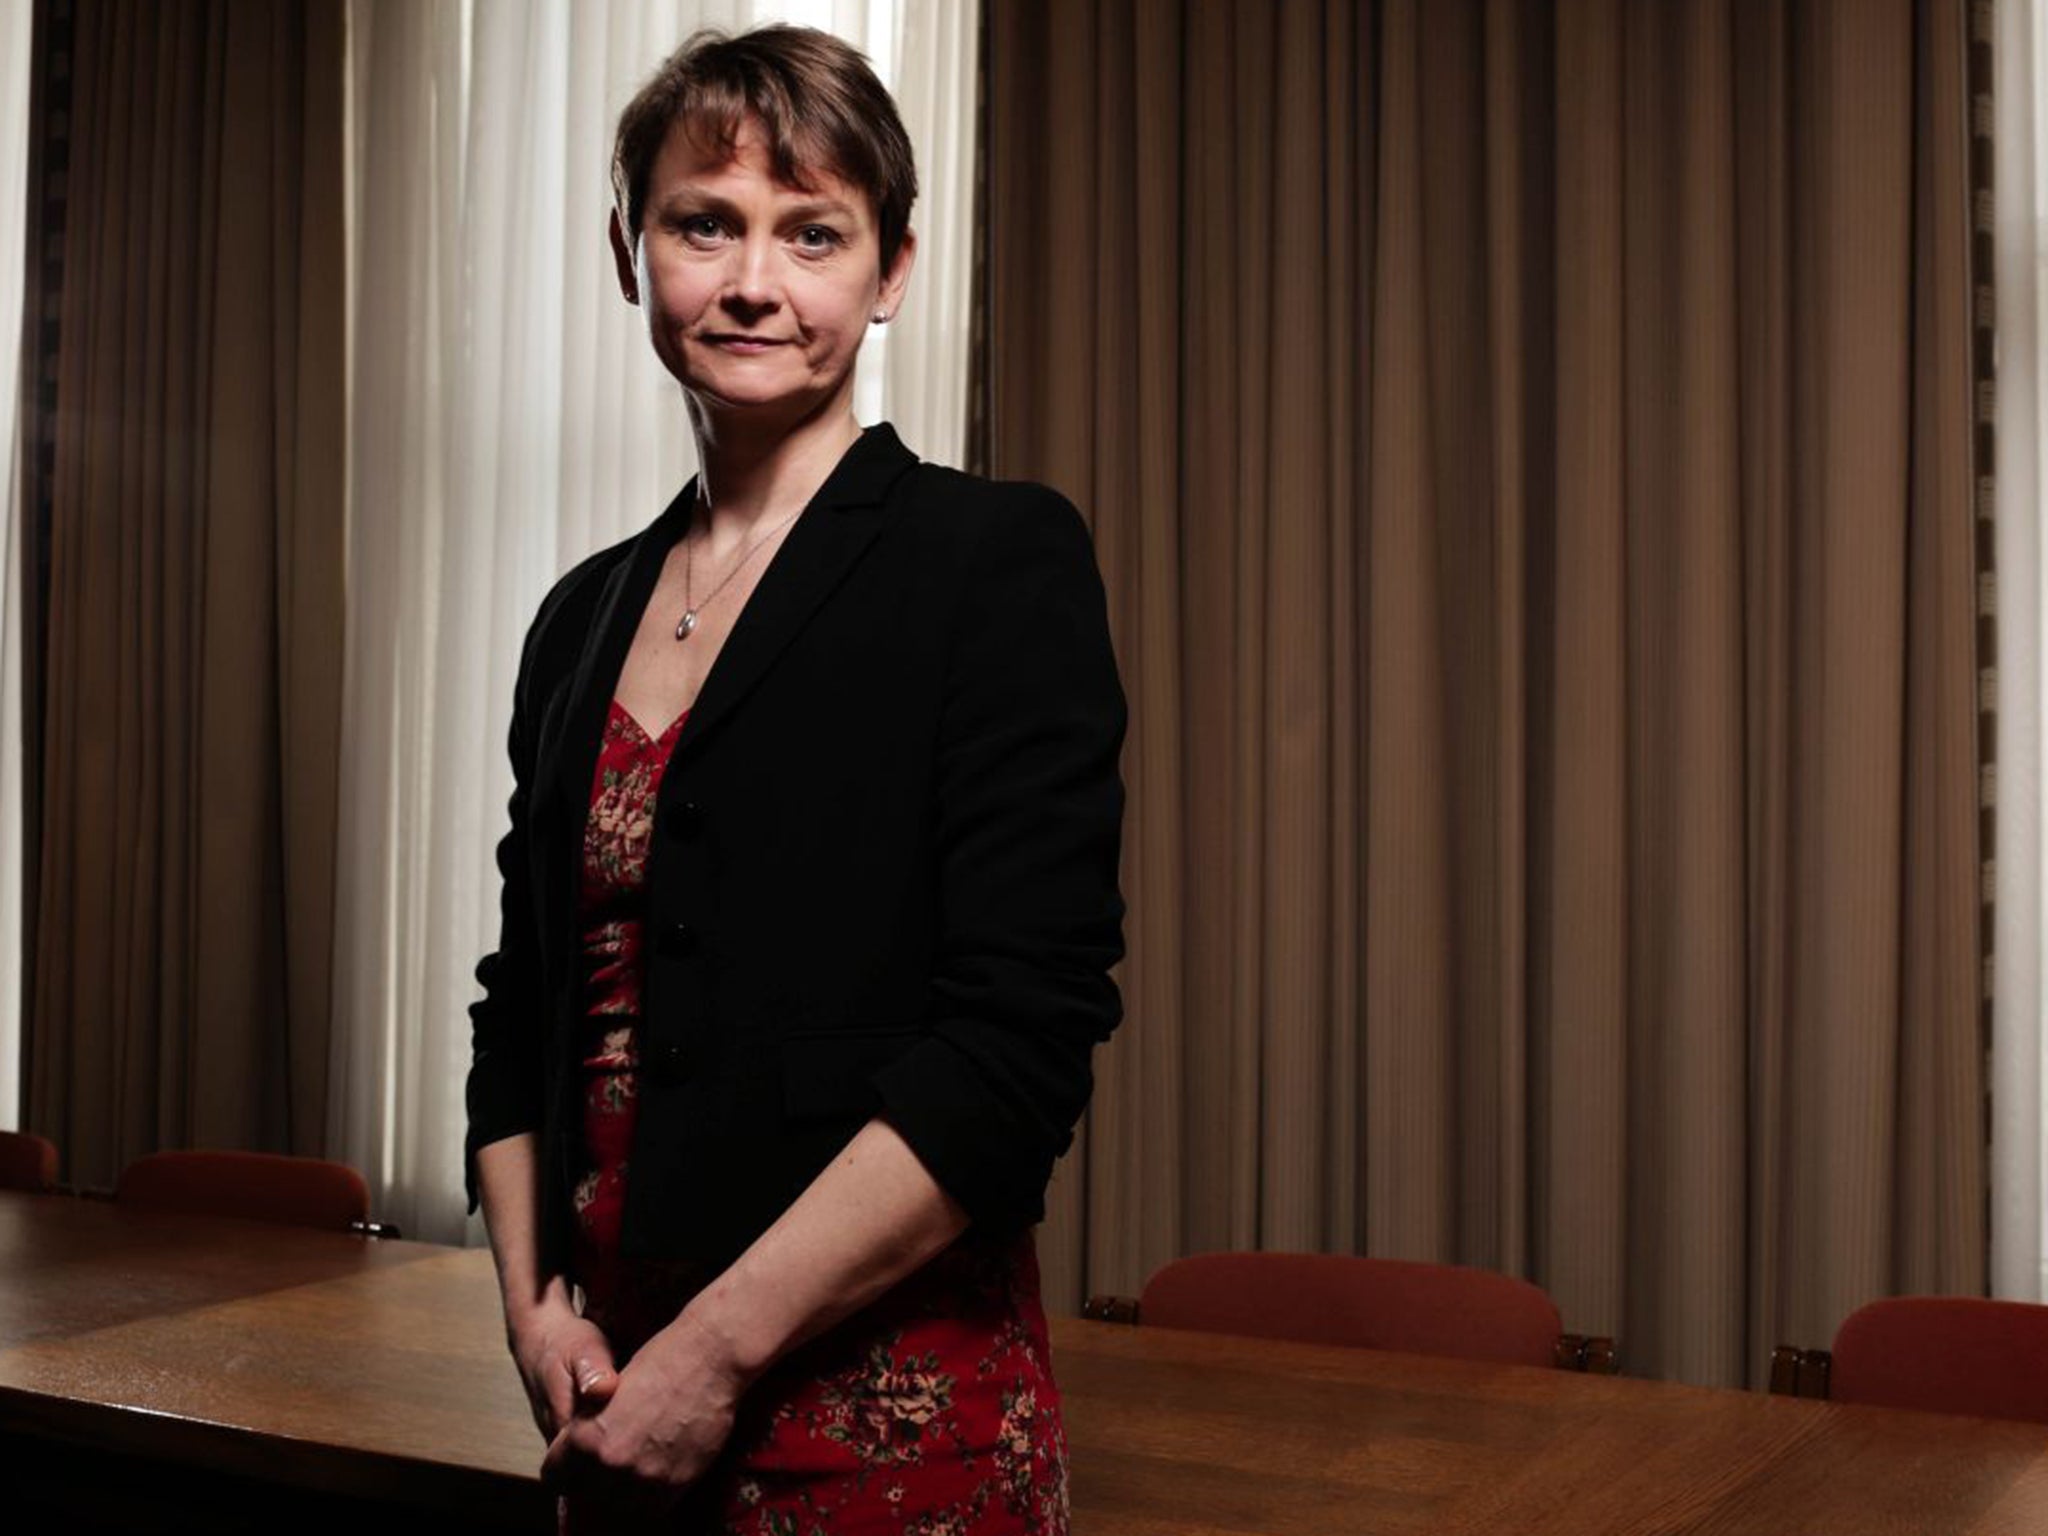 Yvette Cooper wants Britain to launch its own social media strategy to encourage young people to turn away from extremism